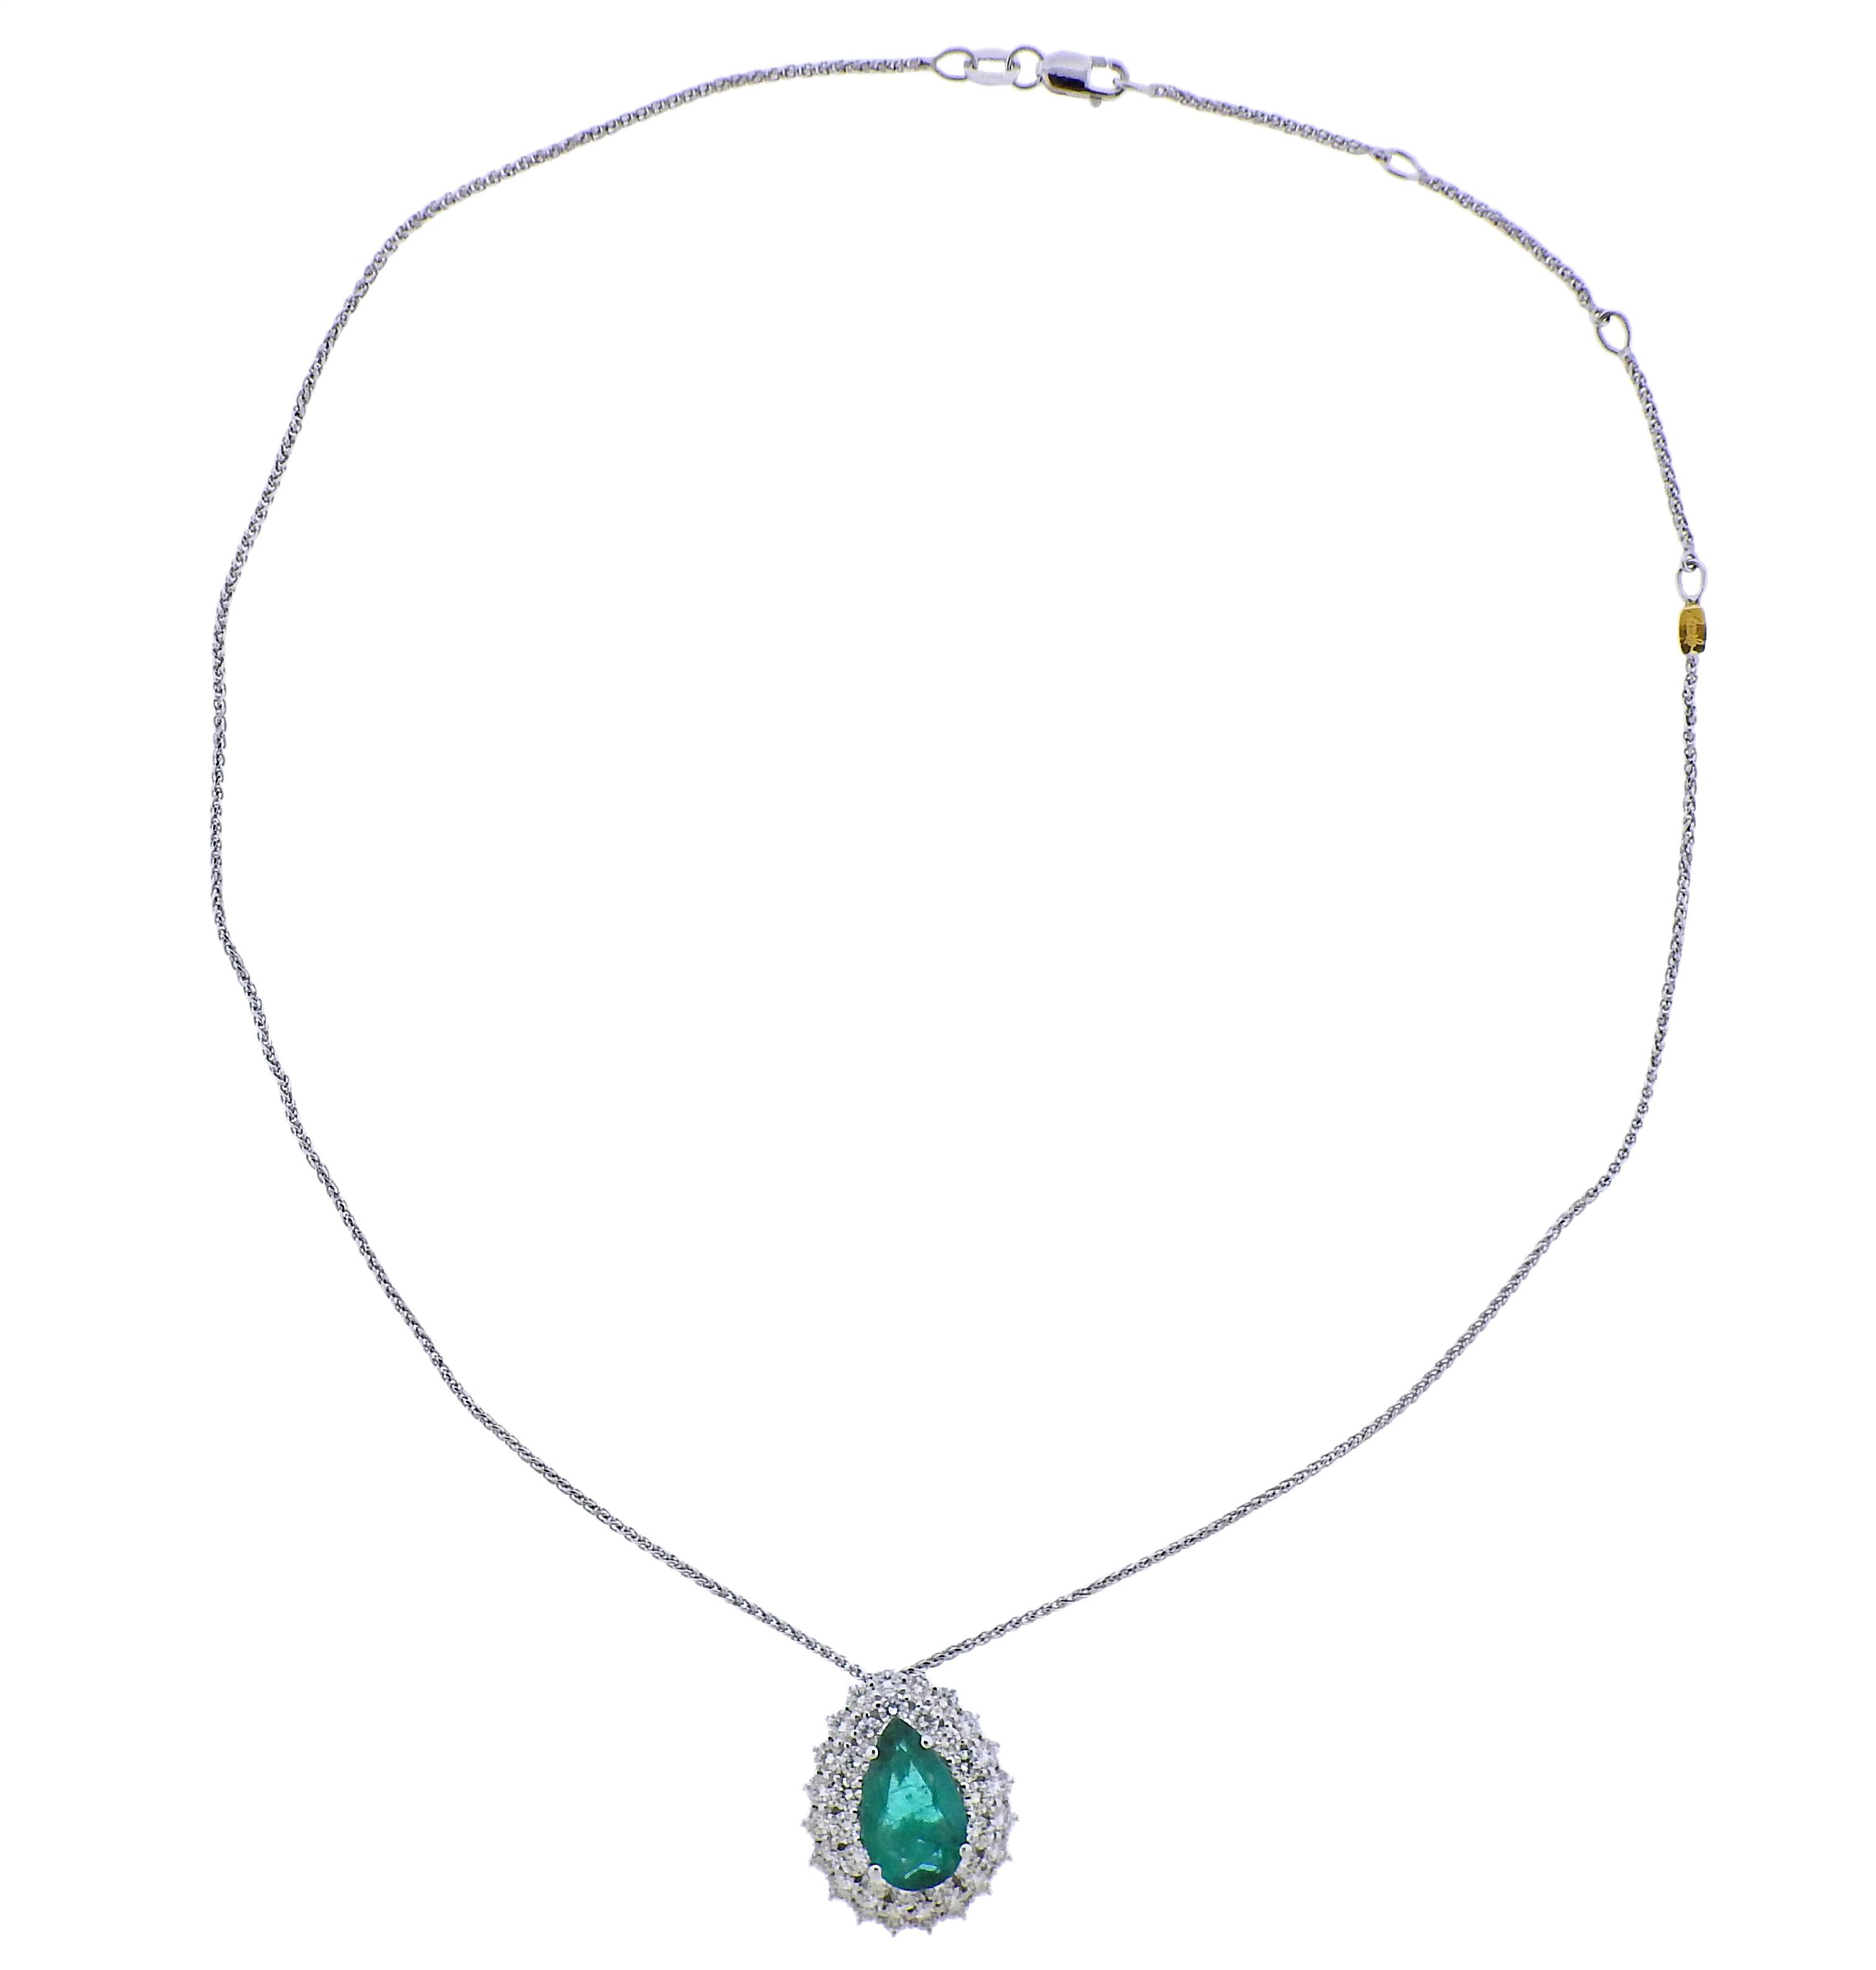 18k white gold chain with suspended pendant. Featuring pear shape emerald (approx. 13.2 x 8.5 x 4.3mm)  surrounded with approx. 1.60ctw in diamonds. Necklace is 17